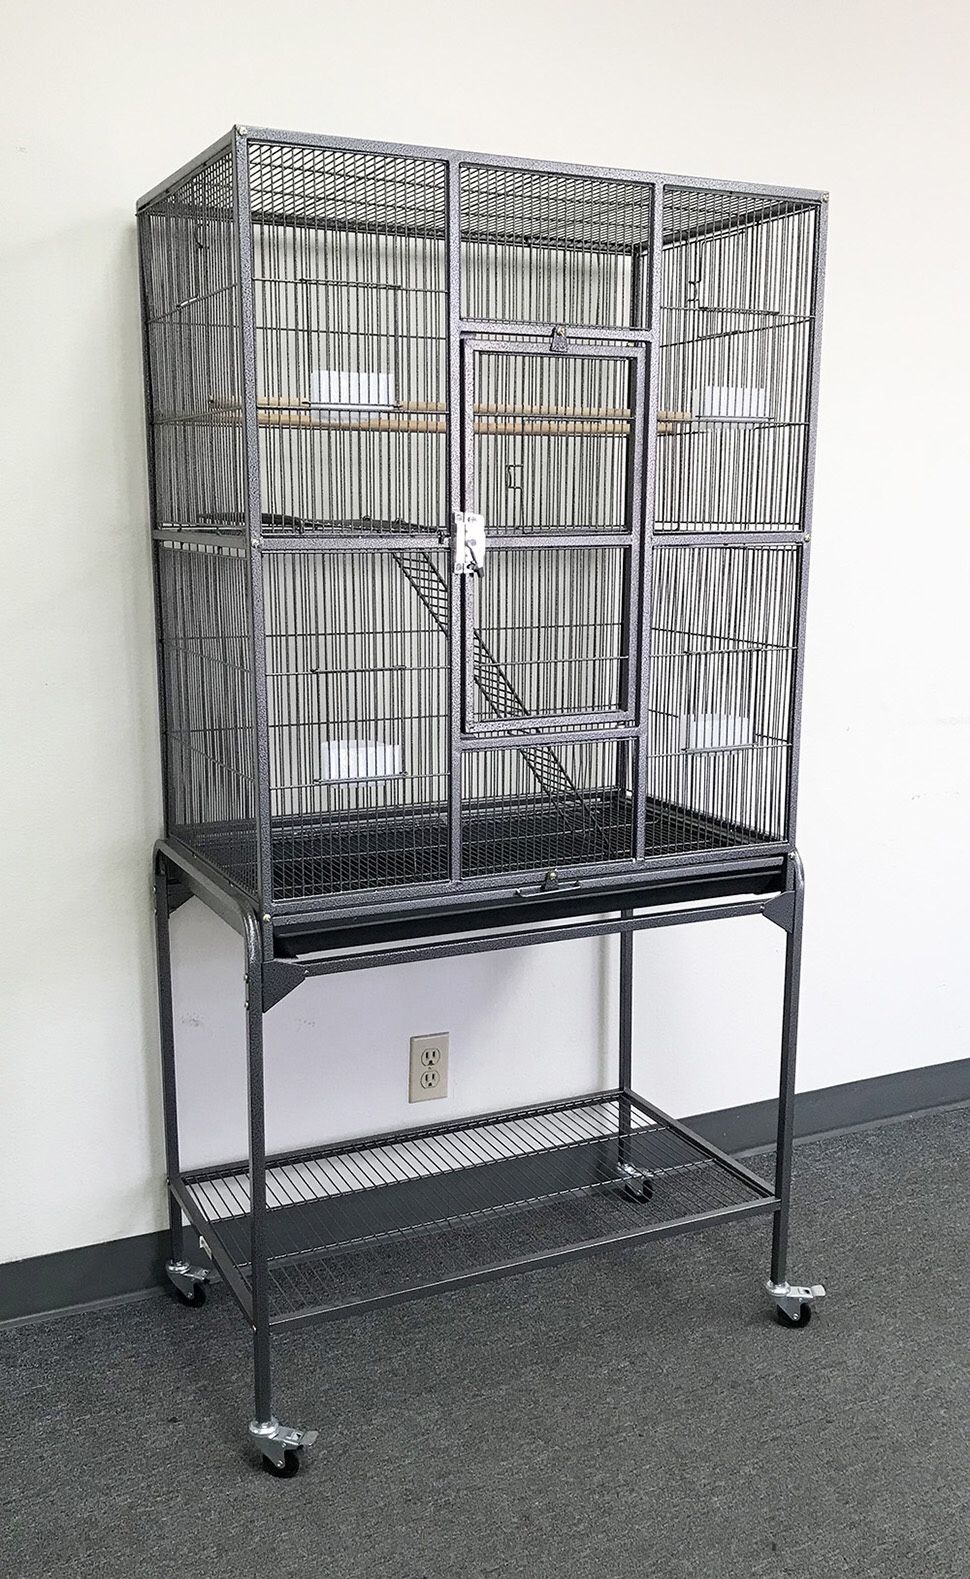 New $90 Large Bird Cage Parrot Ferret Cockatiel House Gym Perch Stand w/ Wheels 32”x18”x63”